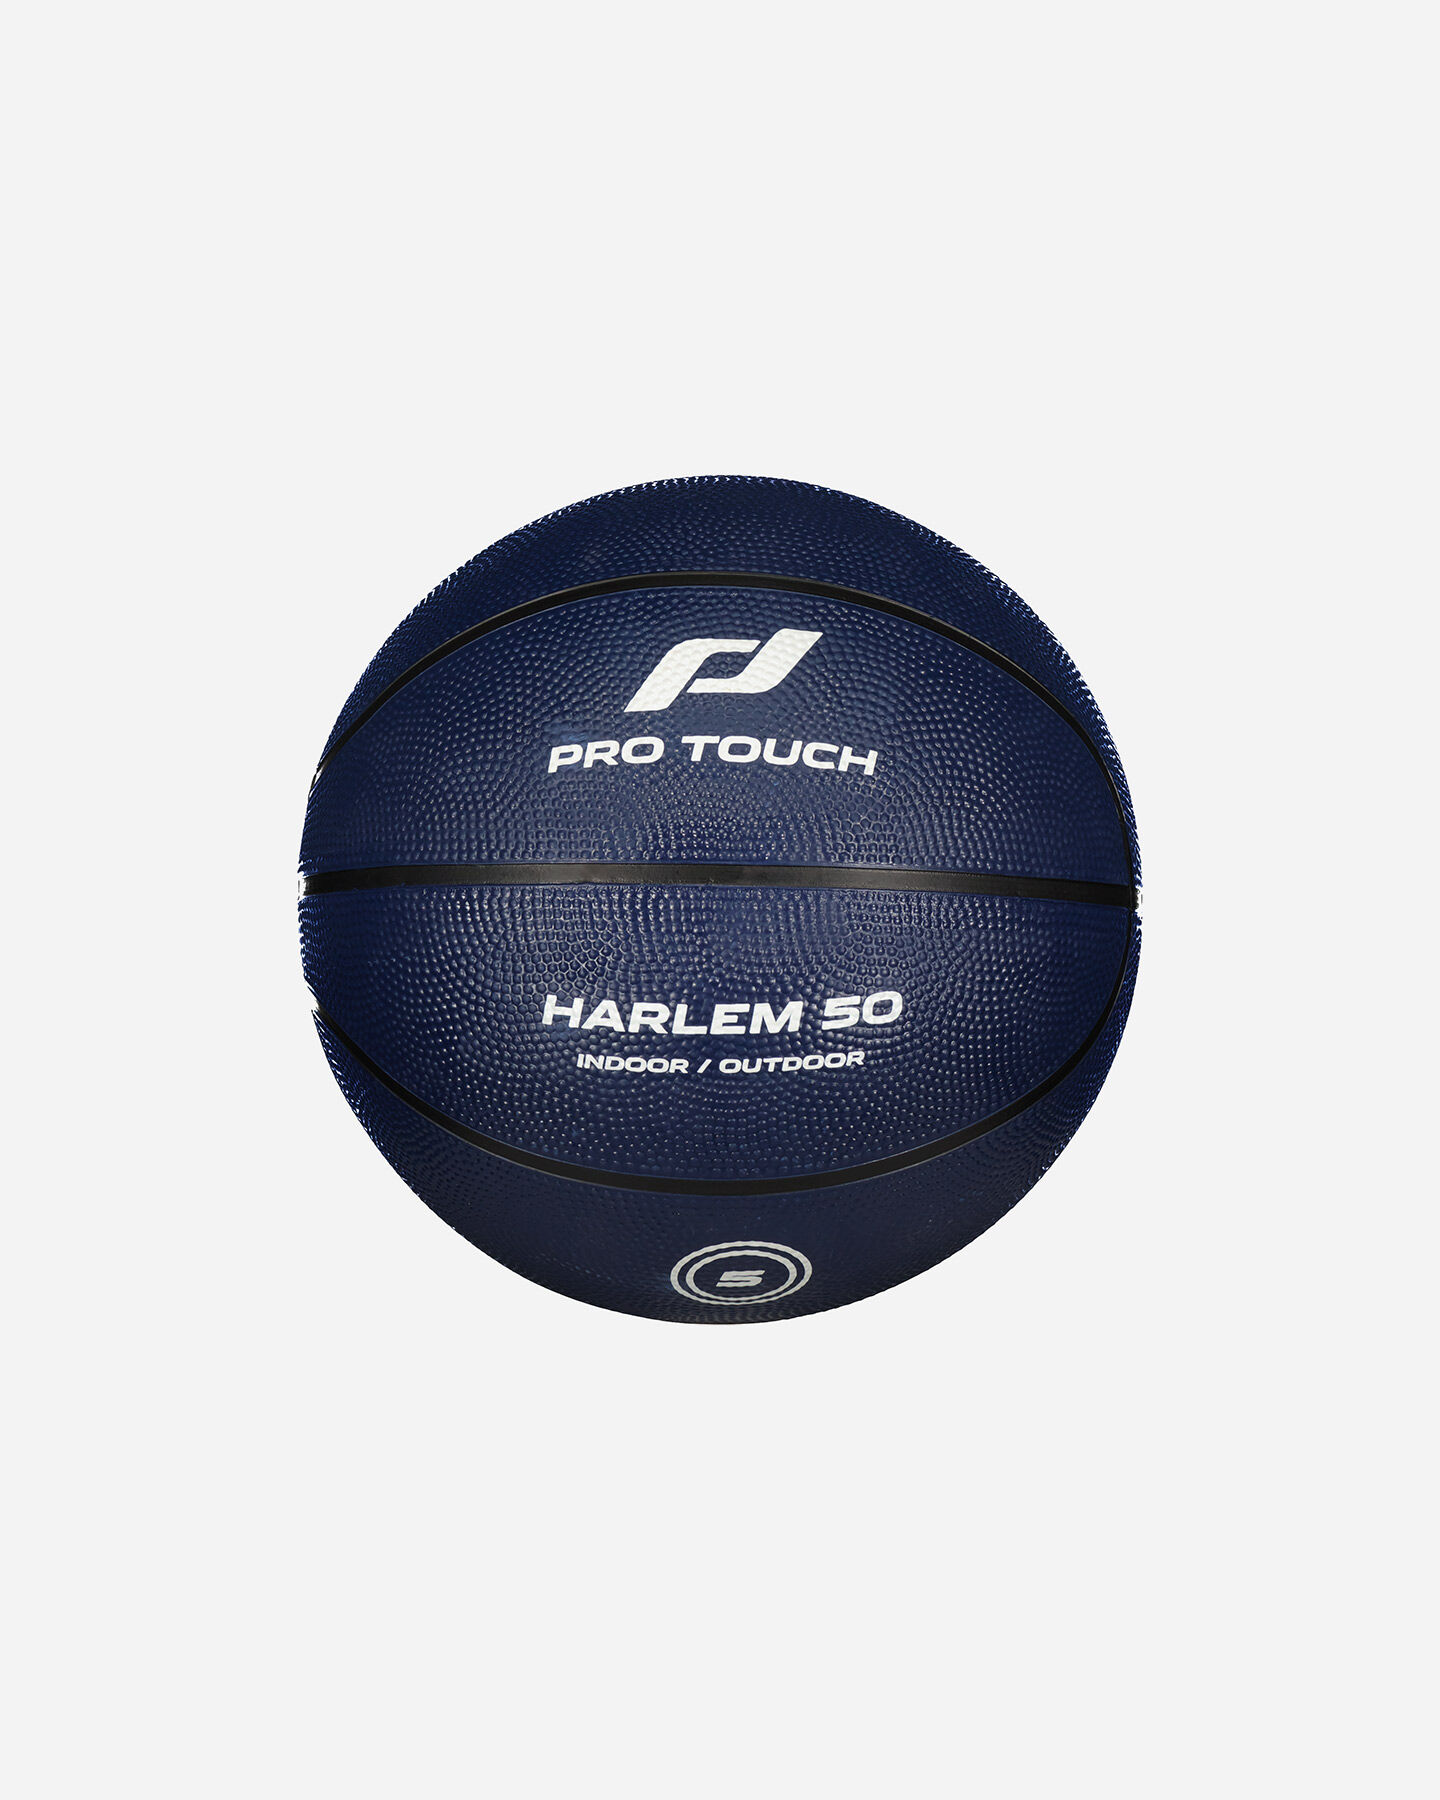  Pallone basket PRO TOUCH HARLEM 50 SZ. 5  S5273341|901|5 scatto 0